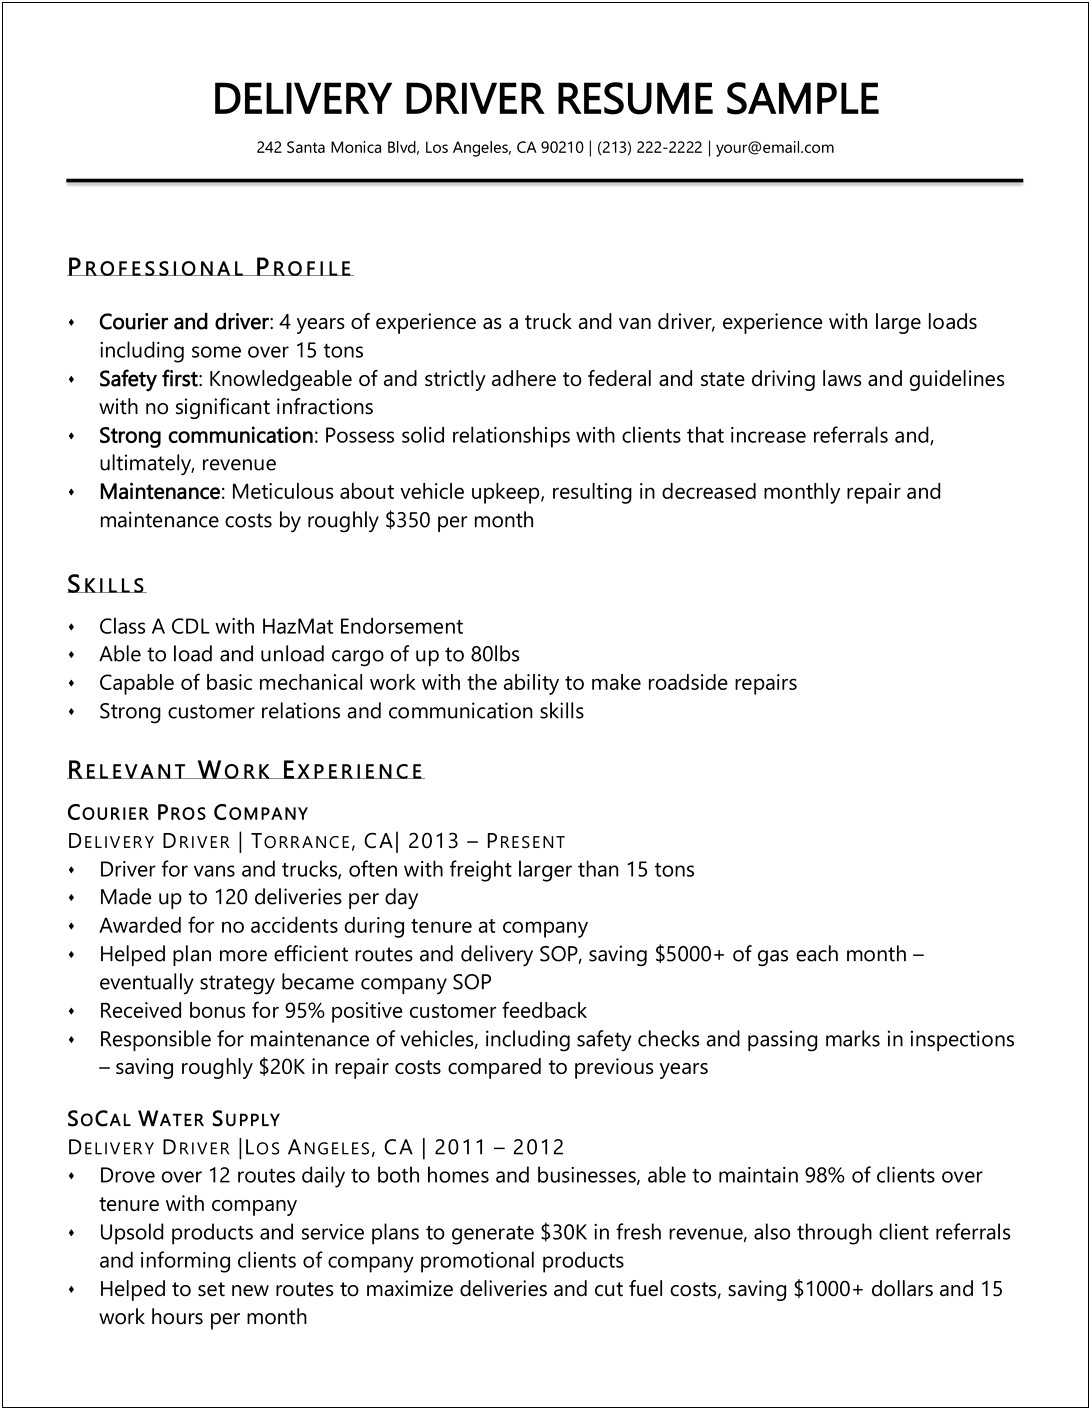 Amazon Delivery Driver Resume Sample